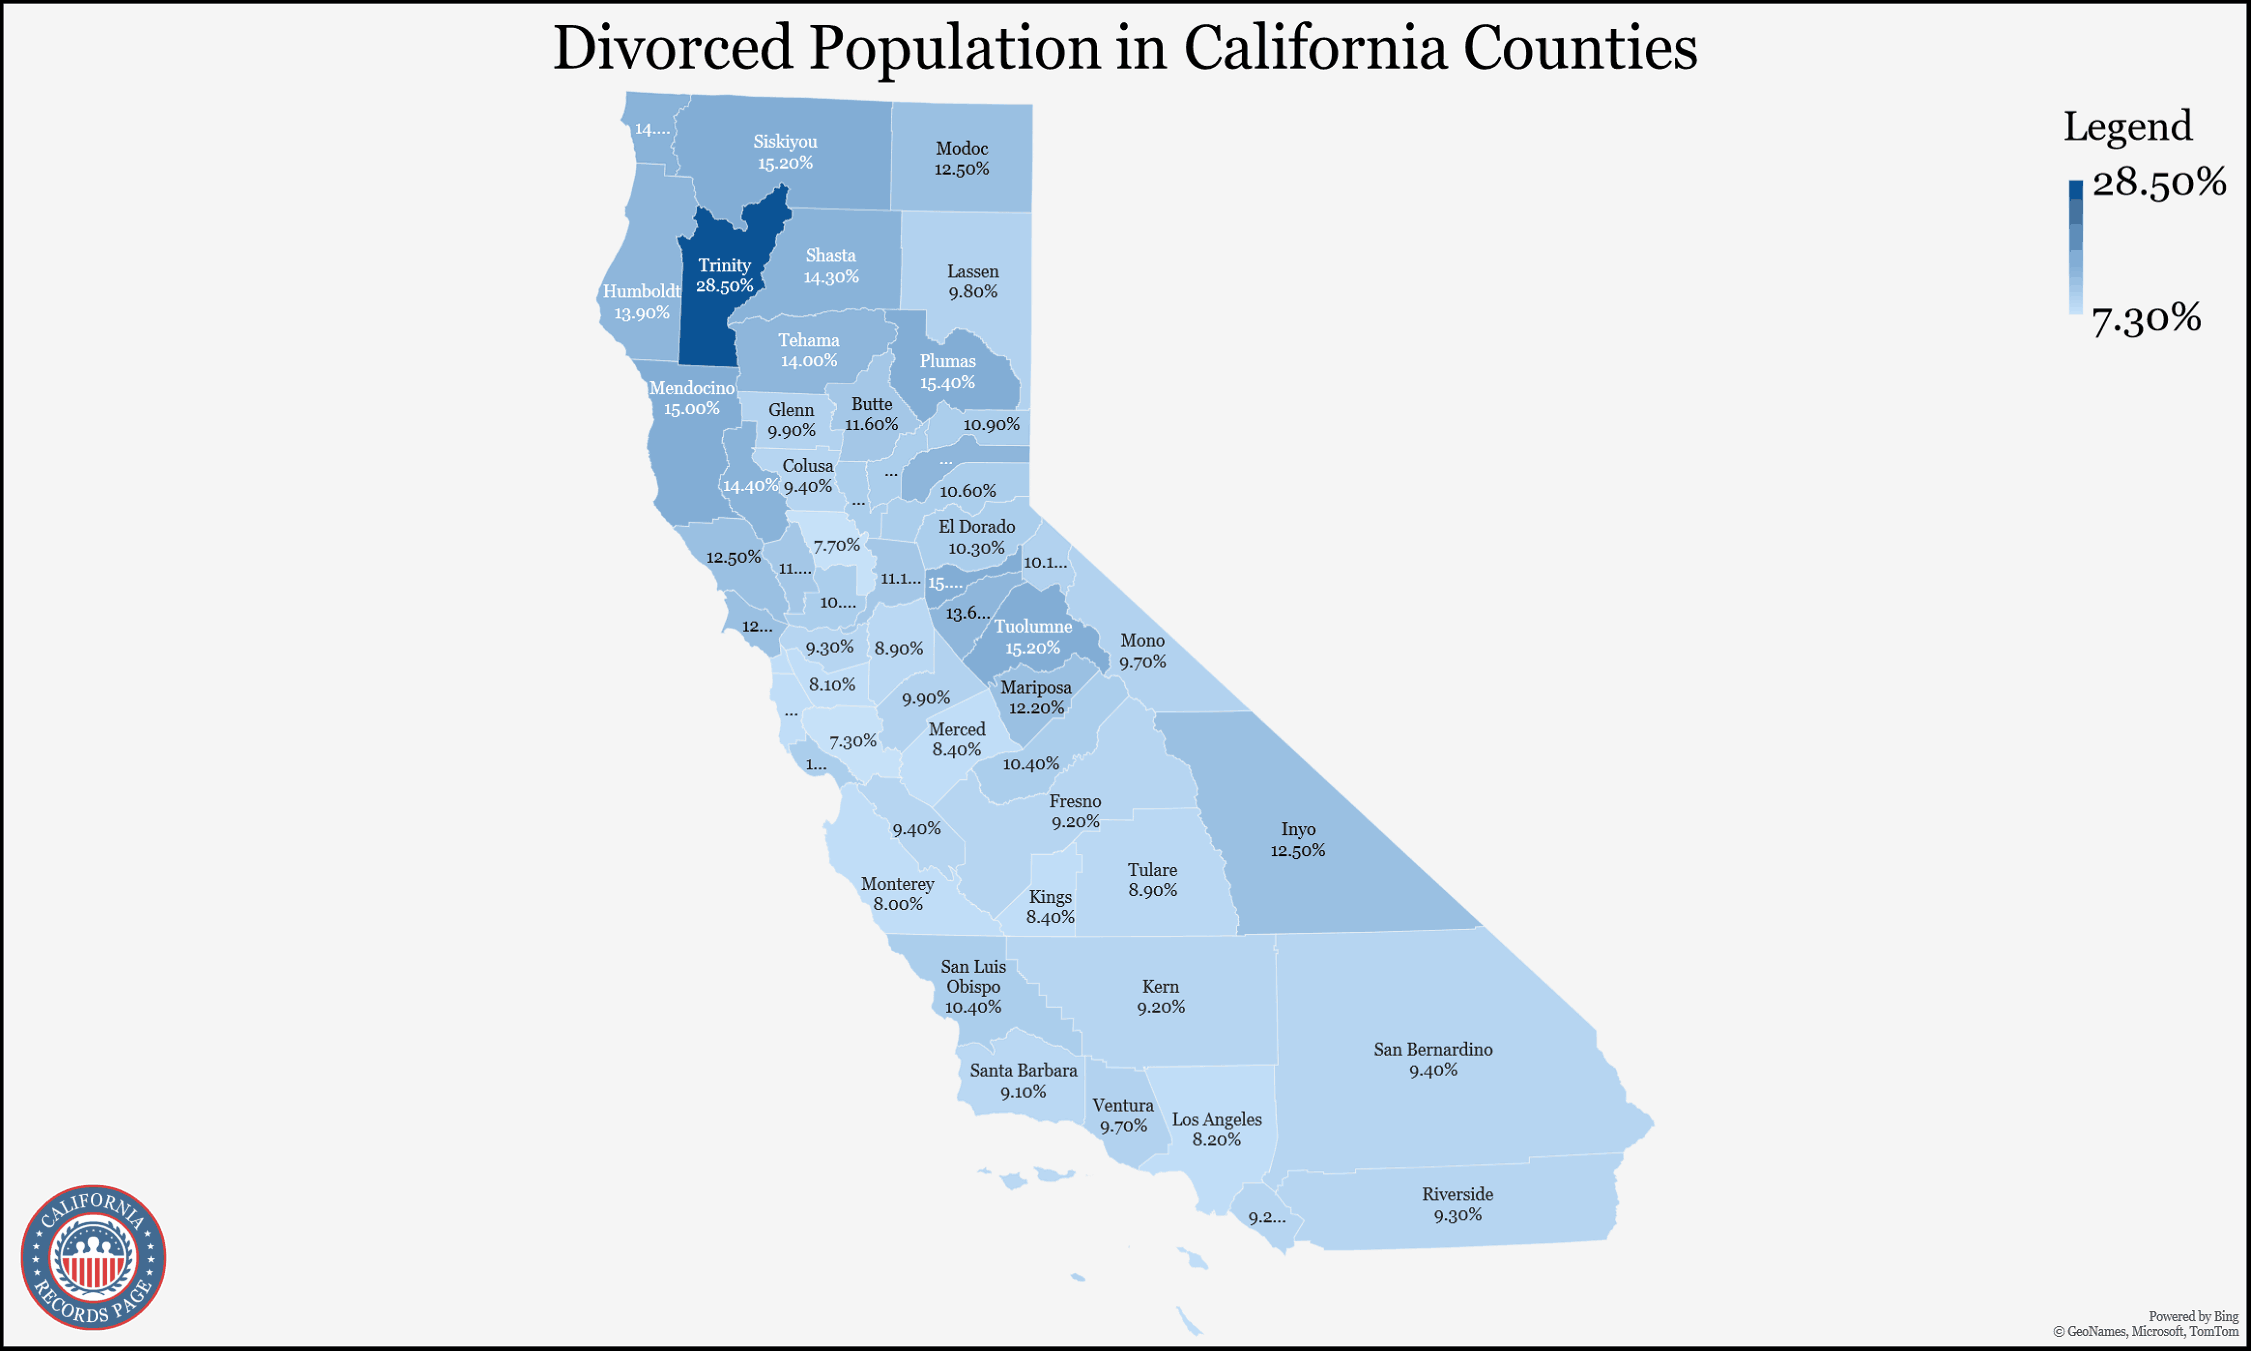 A chart map showing the divorced population counties in the state of California, with a legend on the top right, 28.50% being the highest and 7.30% being the lowest.